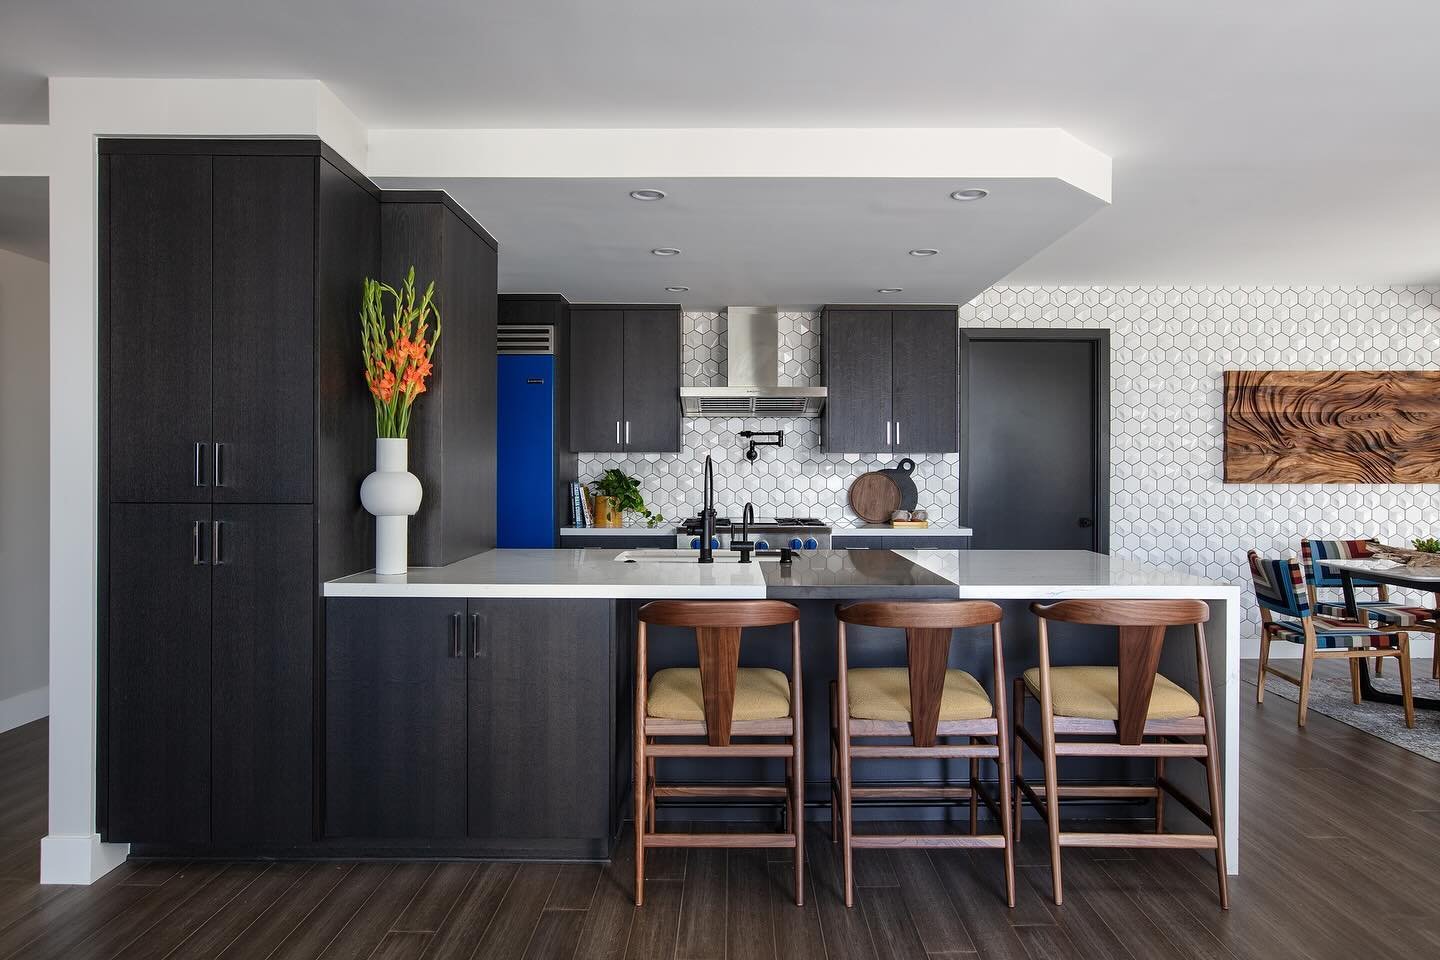 Swipe 👉 for the evolution of this kitchen! Project &lsquo;Geek Chic&rsquo; boasts a fun fusion of multiple design styles and the kitchen is no exception! In this space, we channeled our client&rsquo;s love of New York City loft style by incorporatin